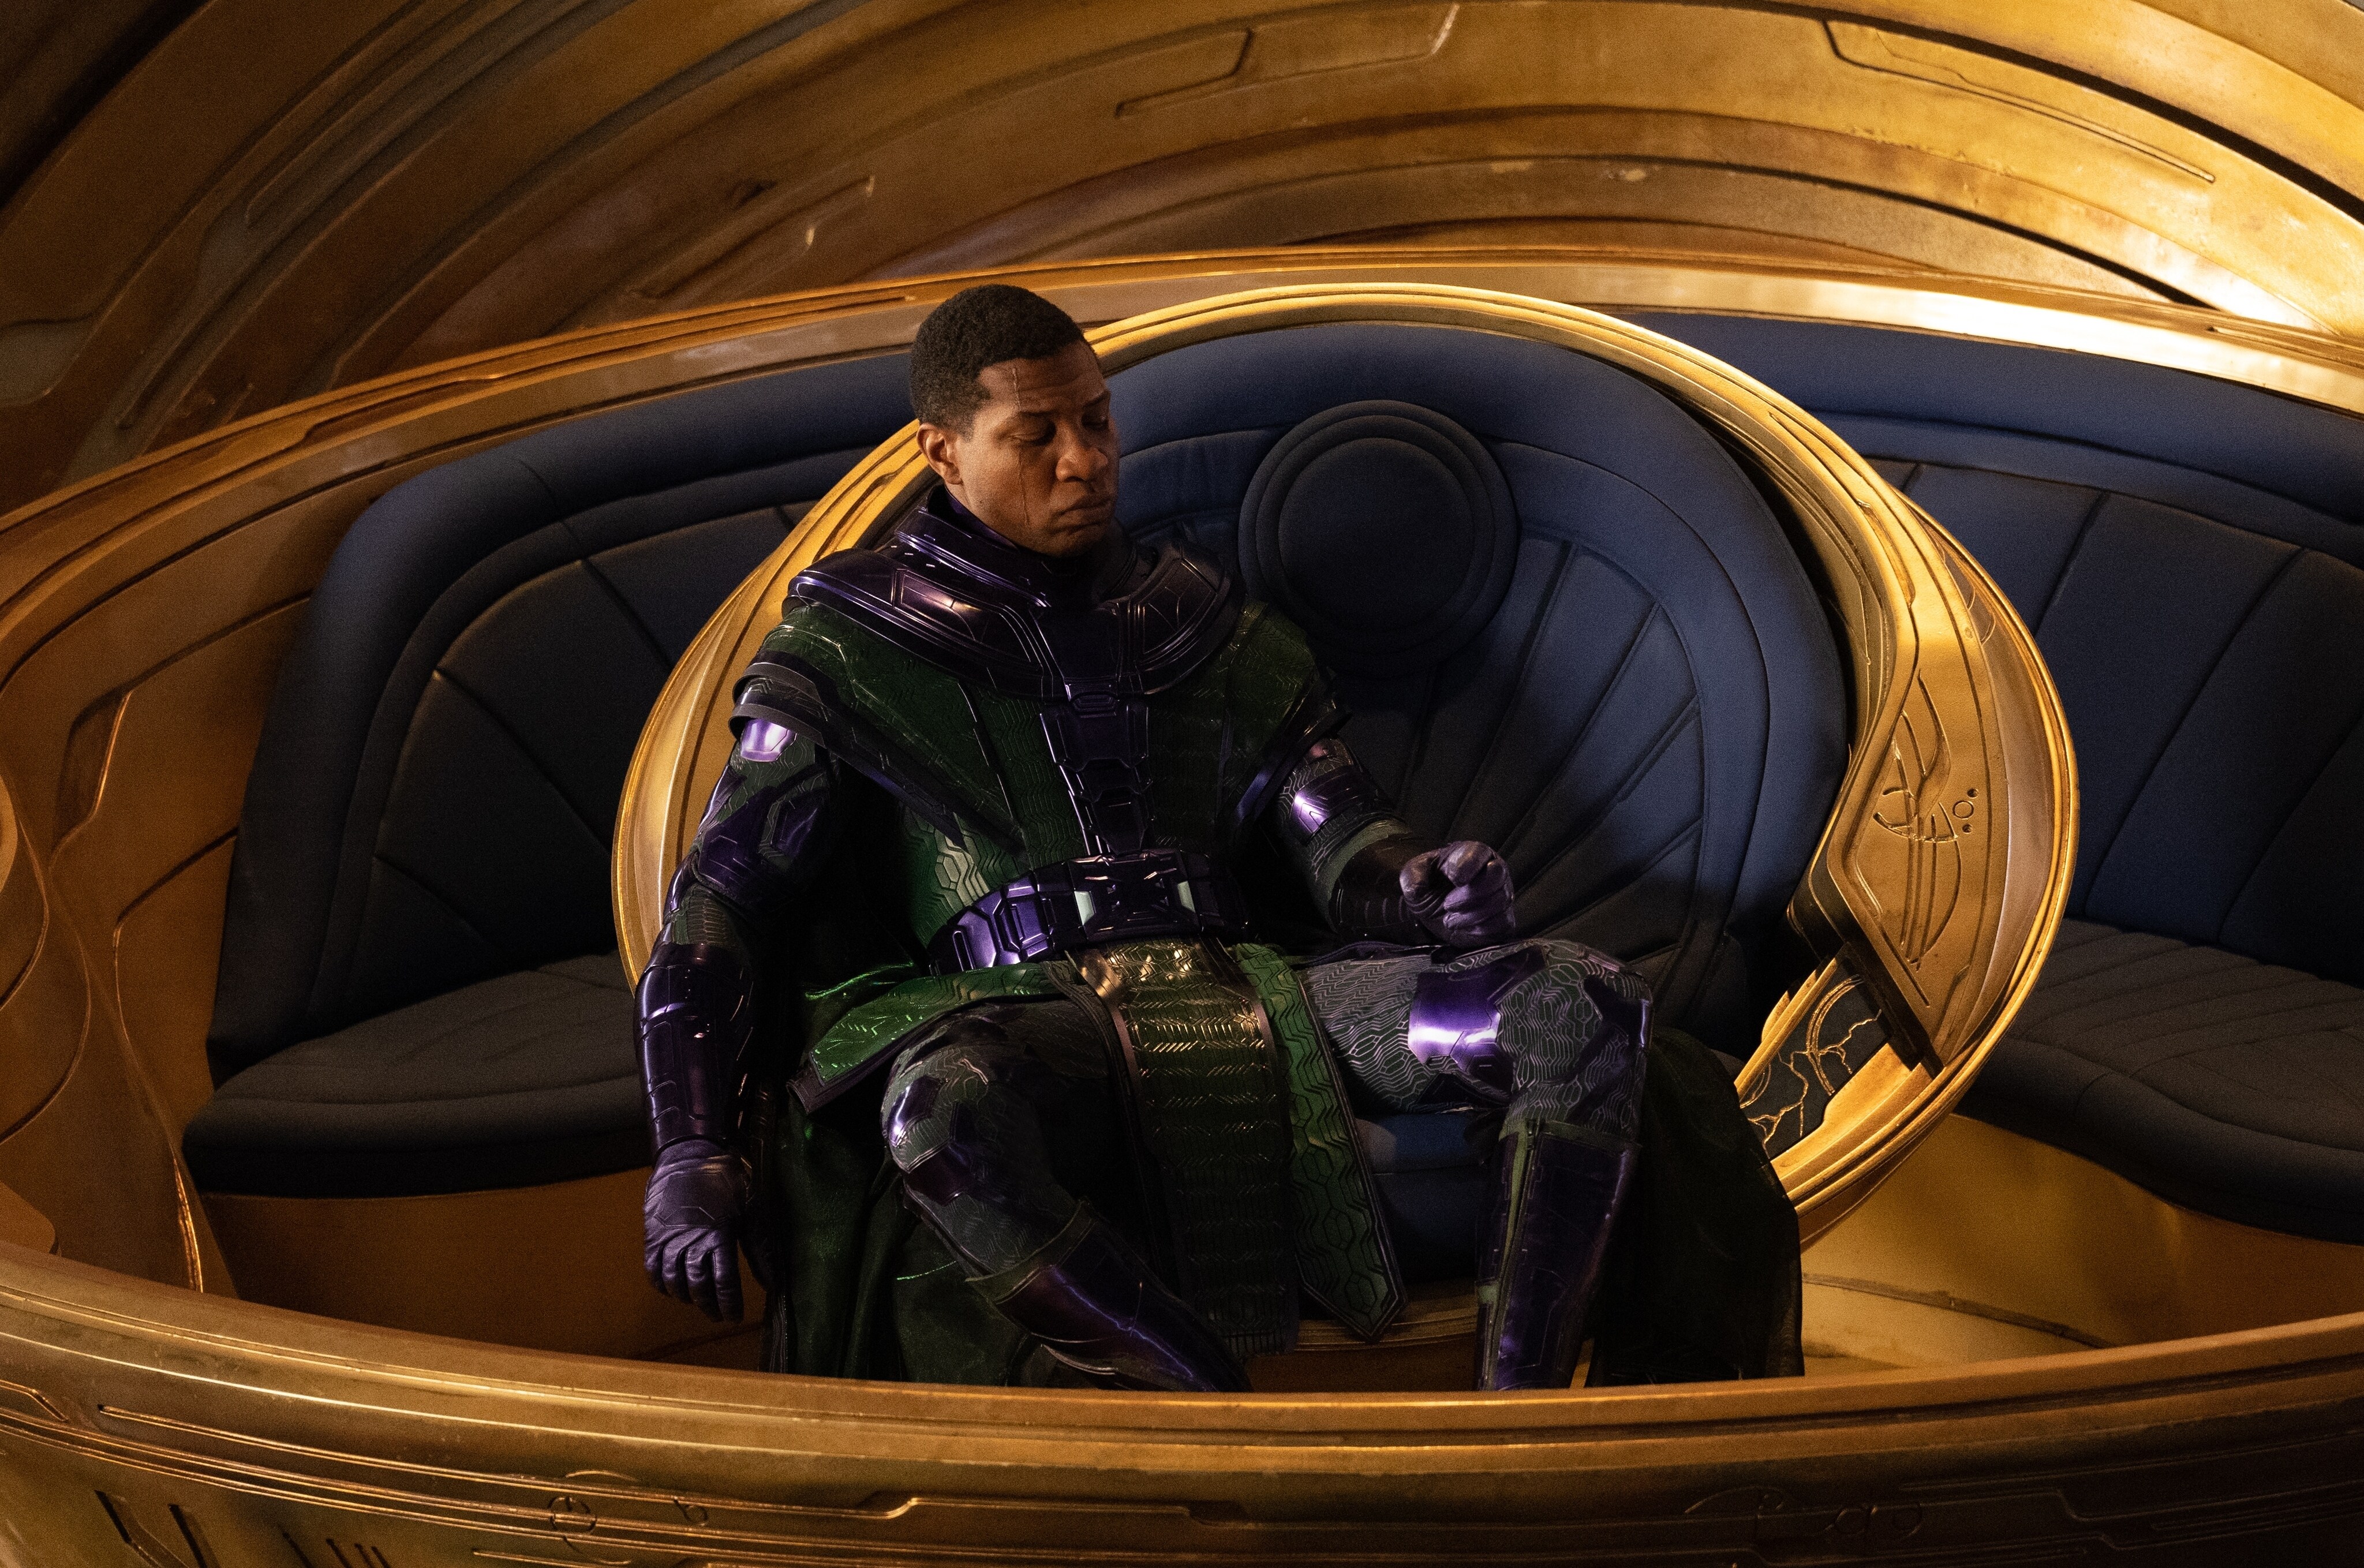 Kang the Conqueror sits in a circular throne-like chair